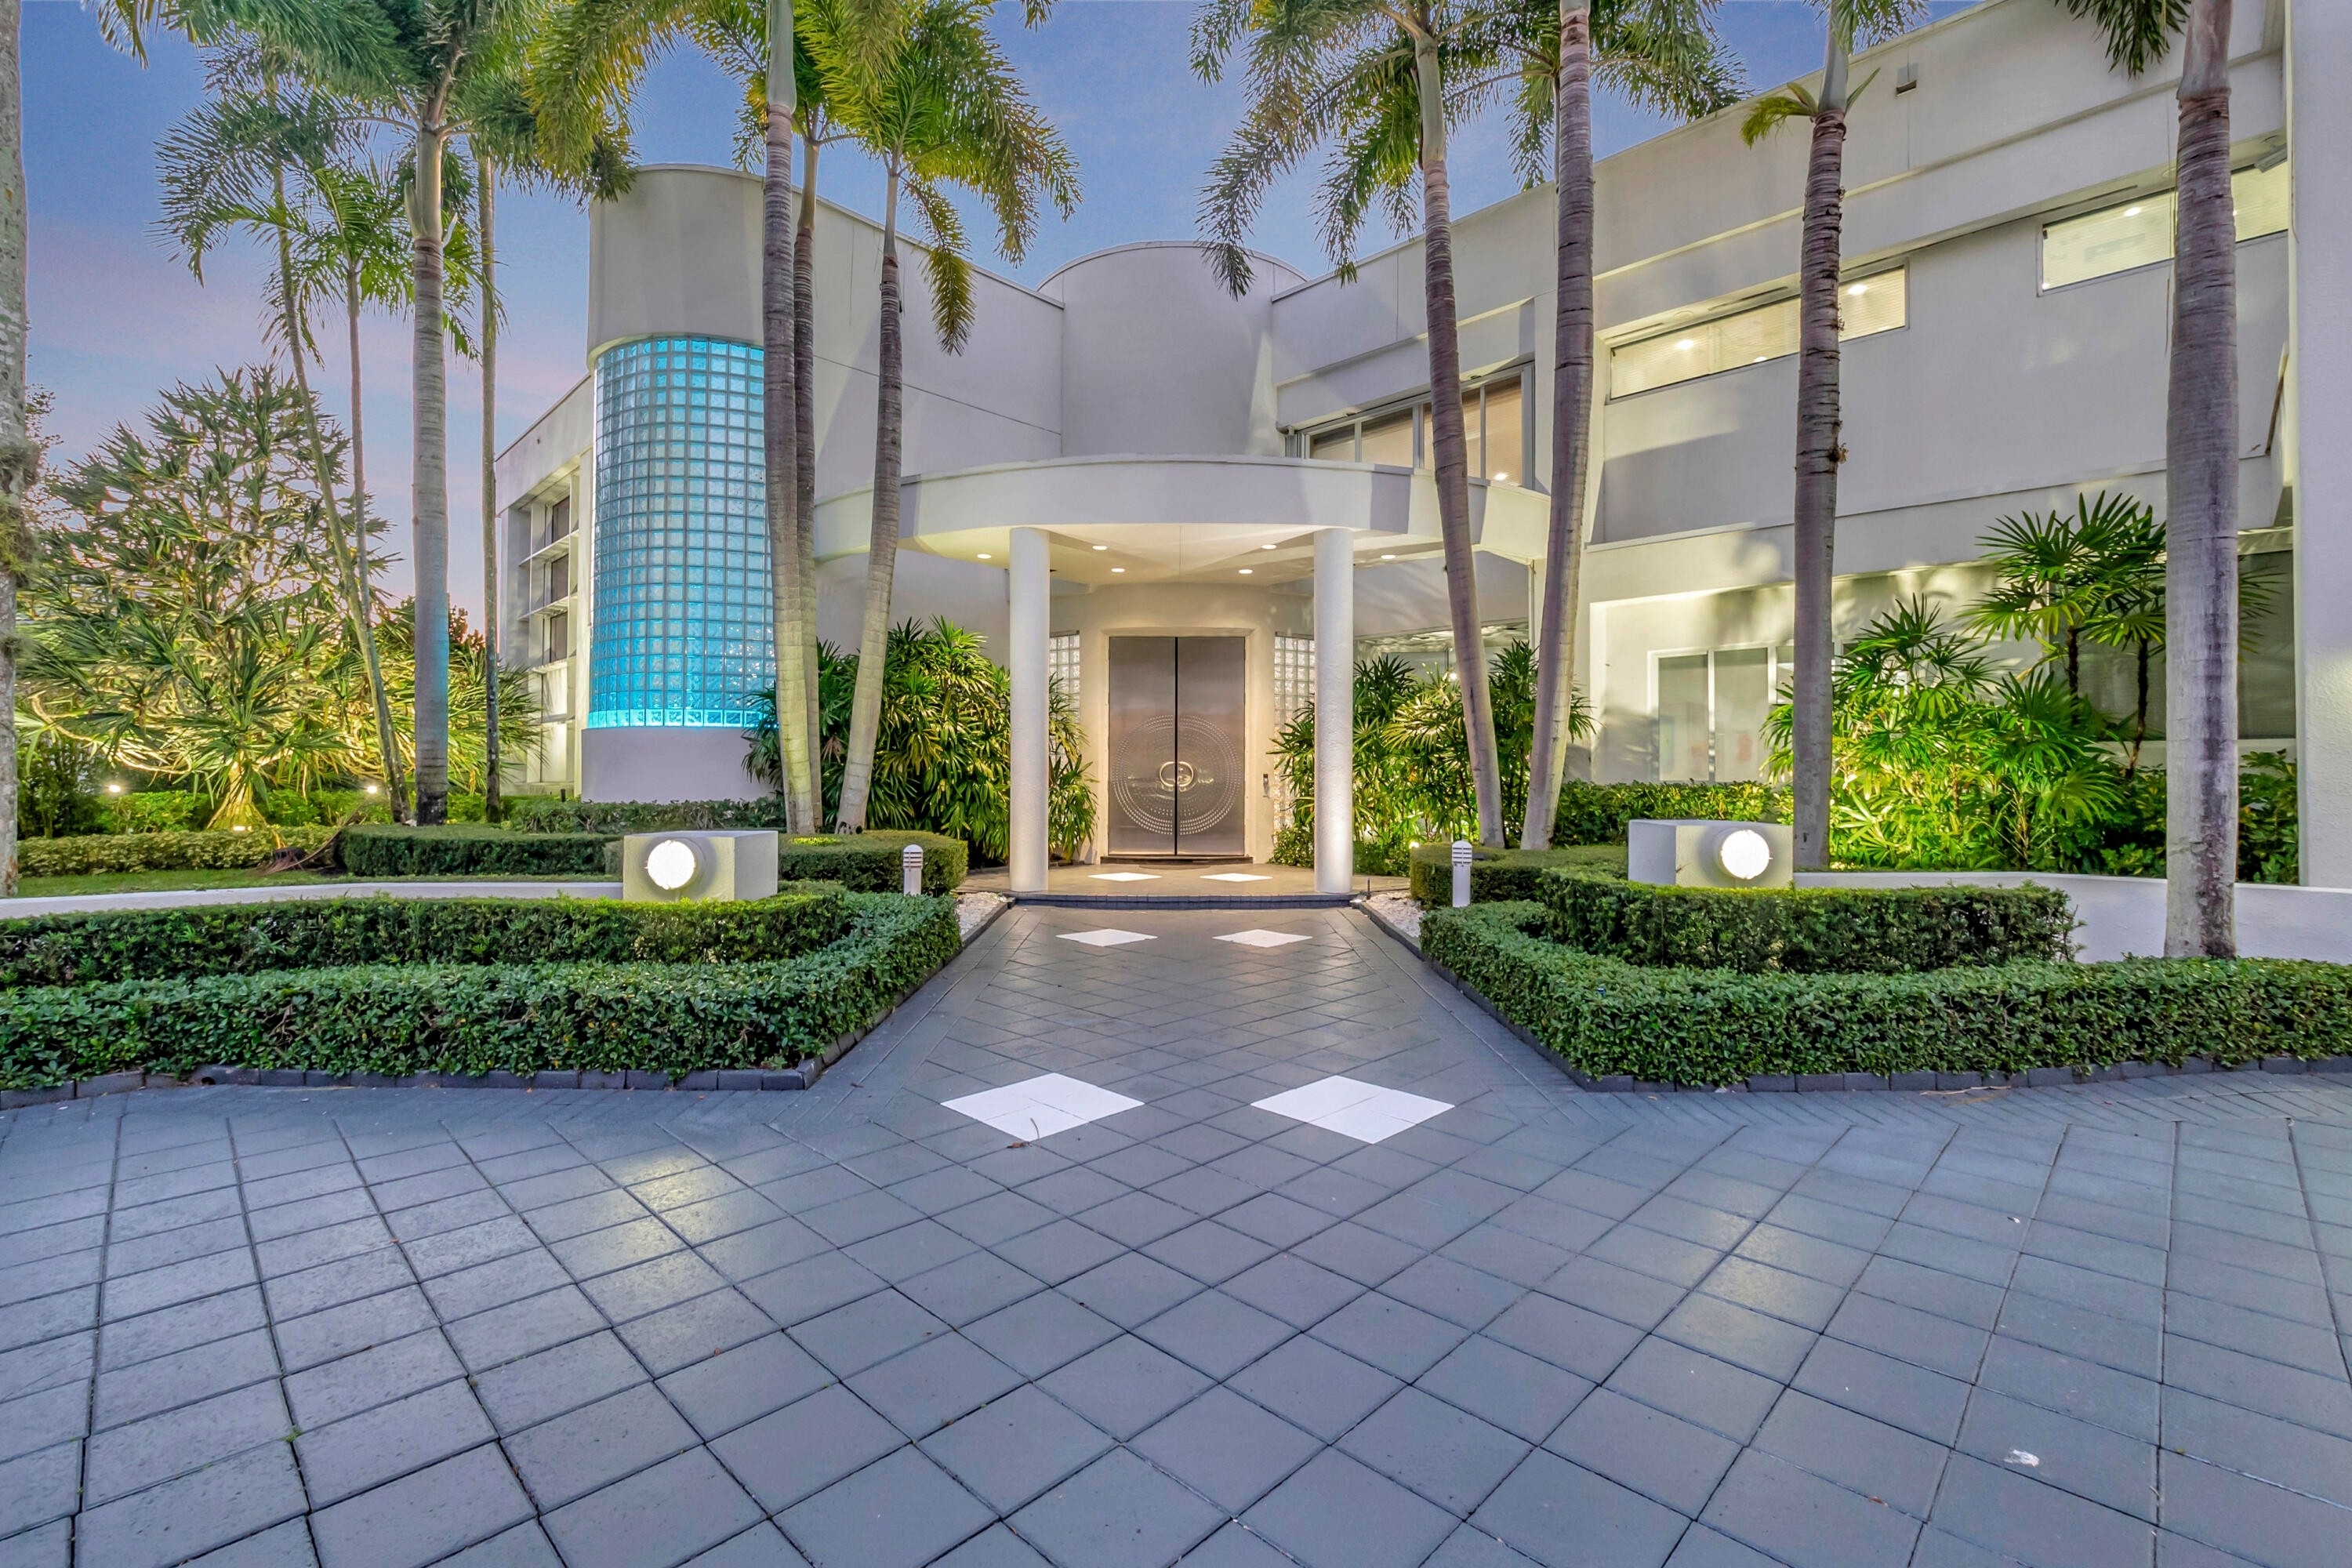 Property at Woodfield Country Club, Boca Raton, FL 33496